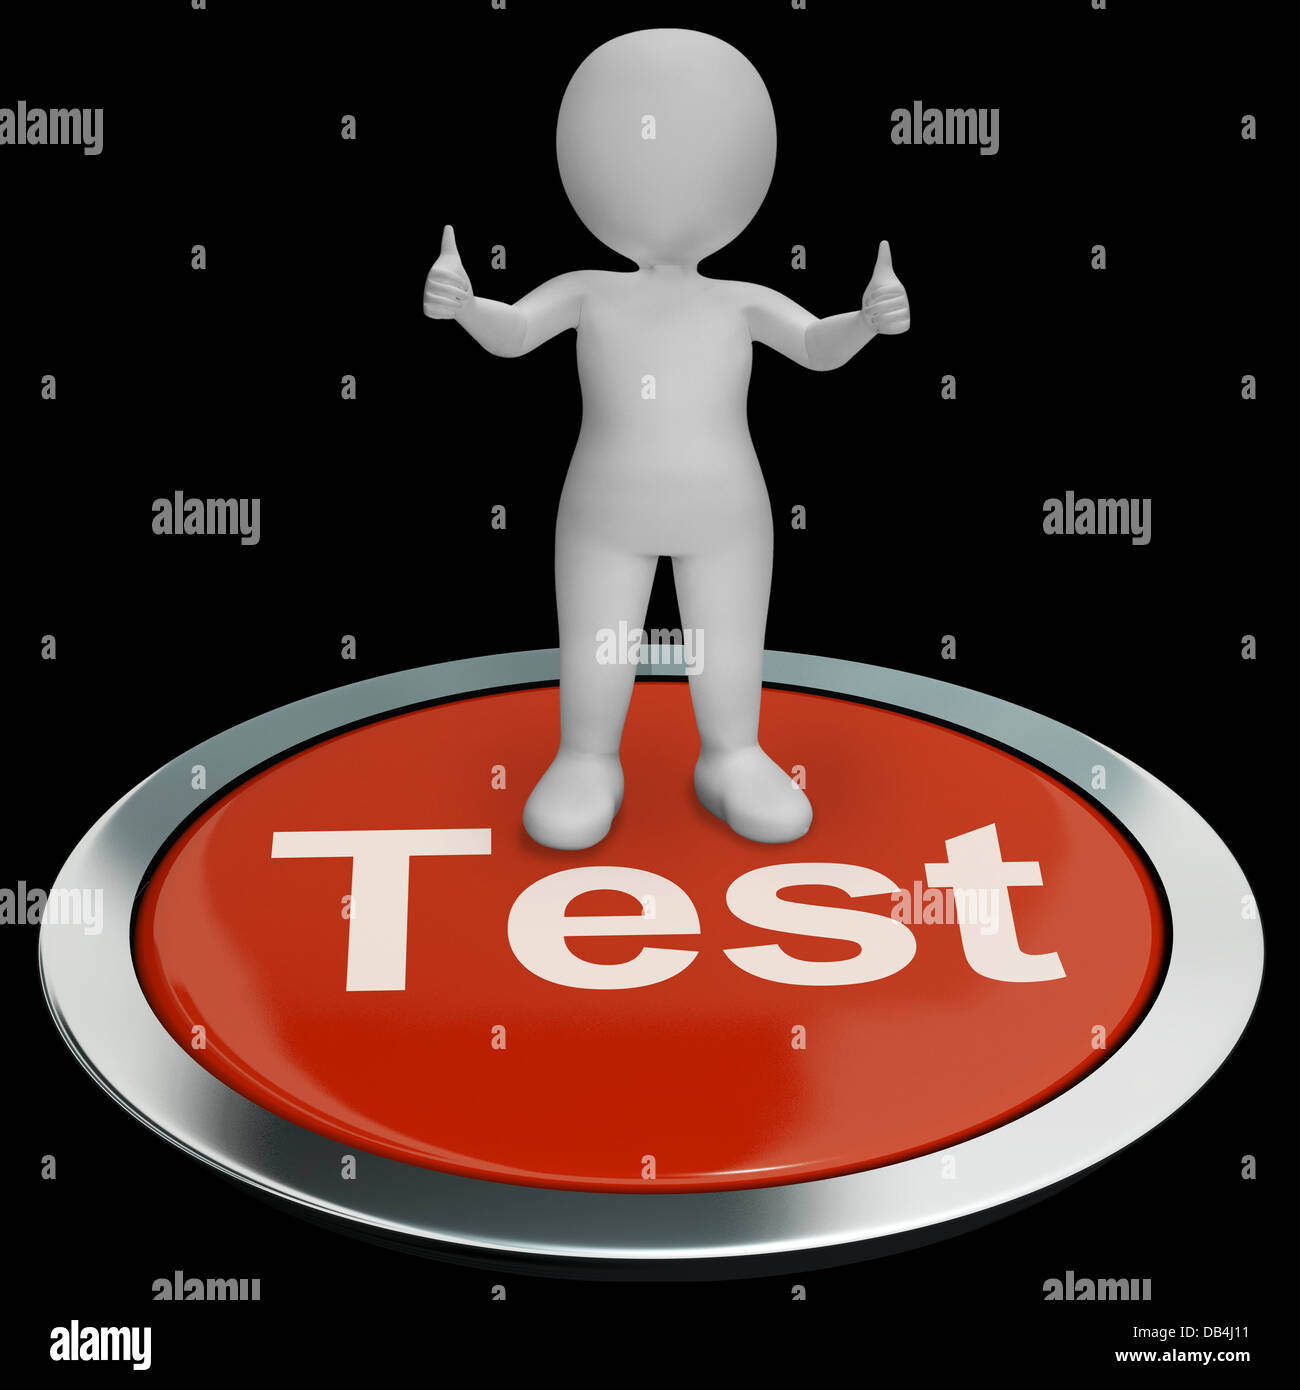 Test Button Showing Quiz And Online Questionnaires Stock Photo